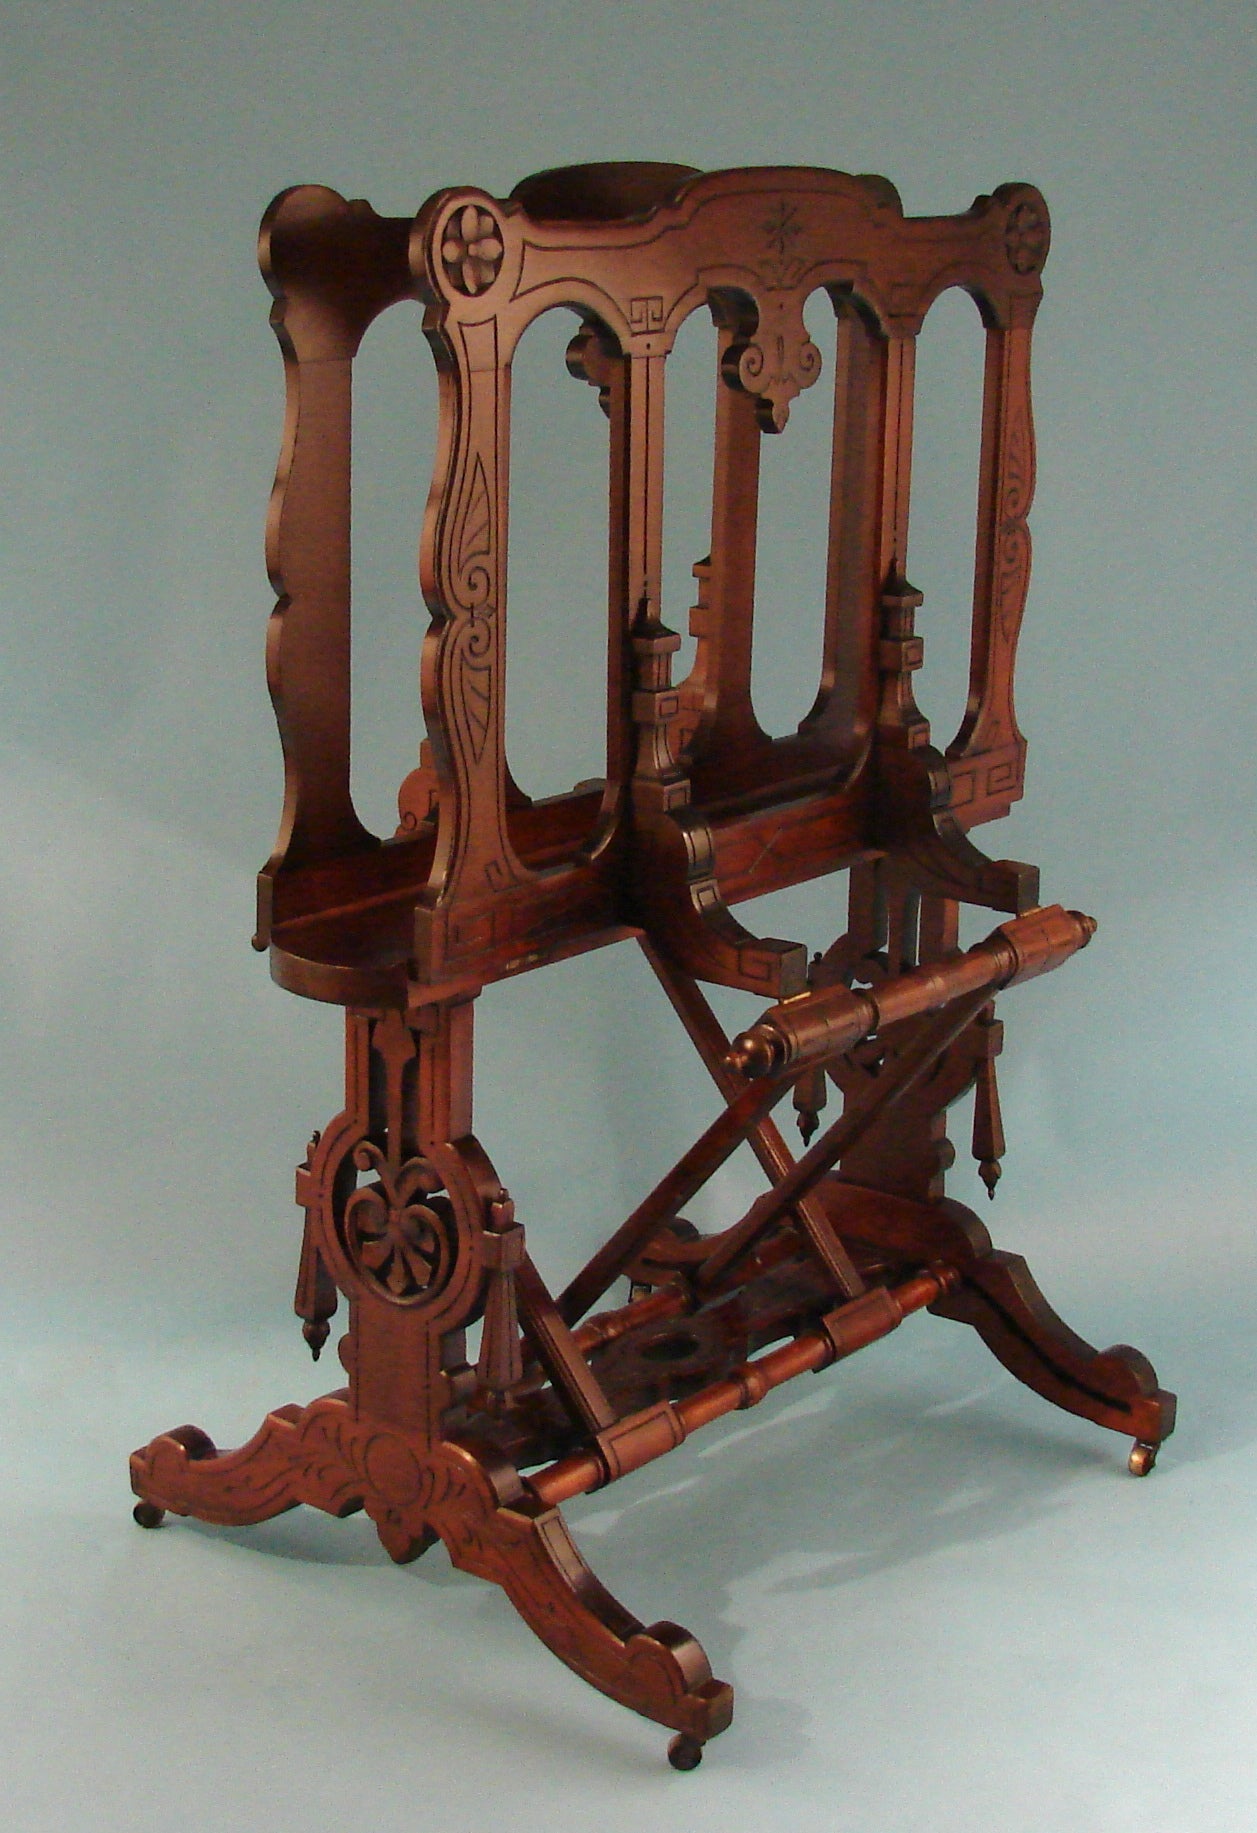 An American Victorian period walnut folio or print stand, the adjustable top section mounted on a conforming base all in the Eastlake taste with incised decoration and attractive carving throughout. Rests on splayed legs ending in casters.